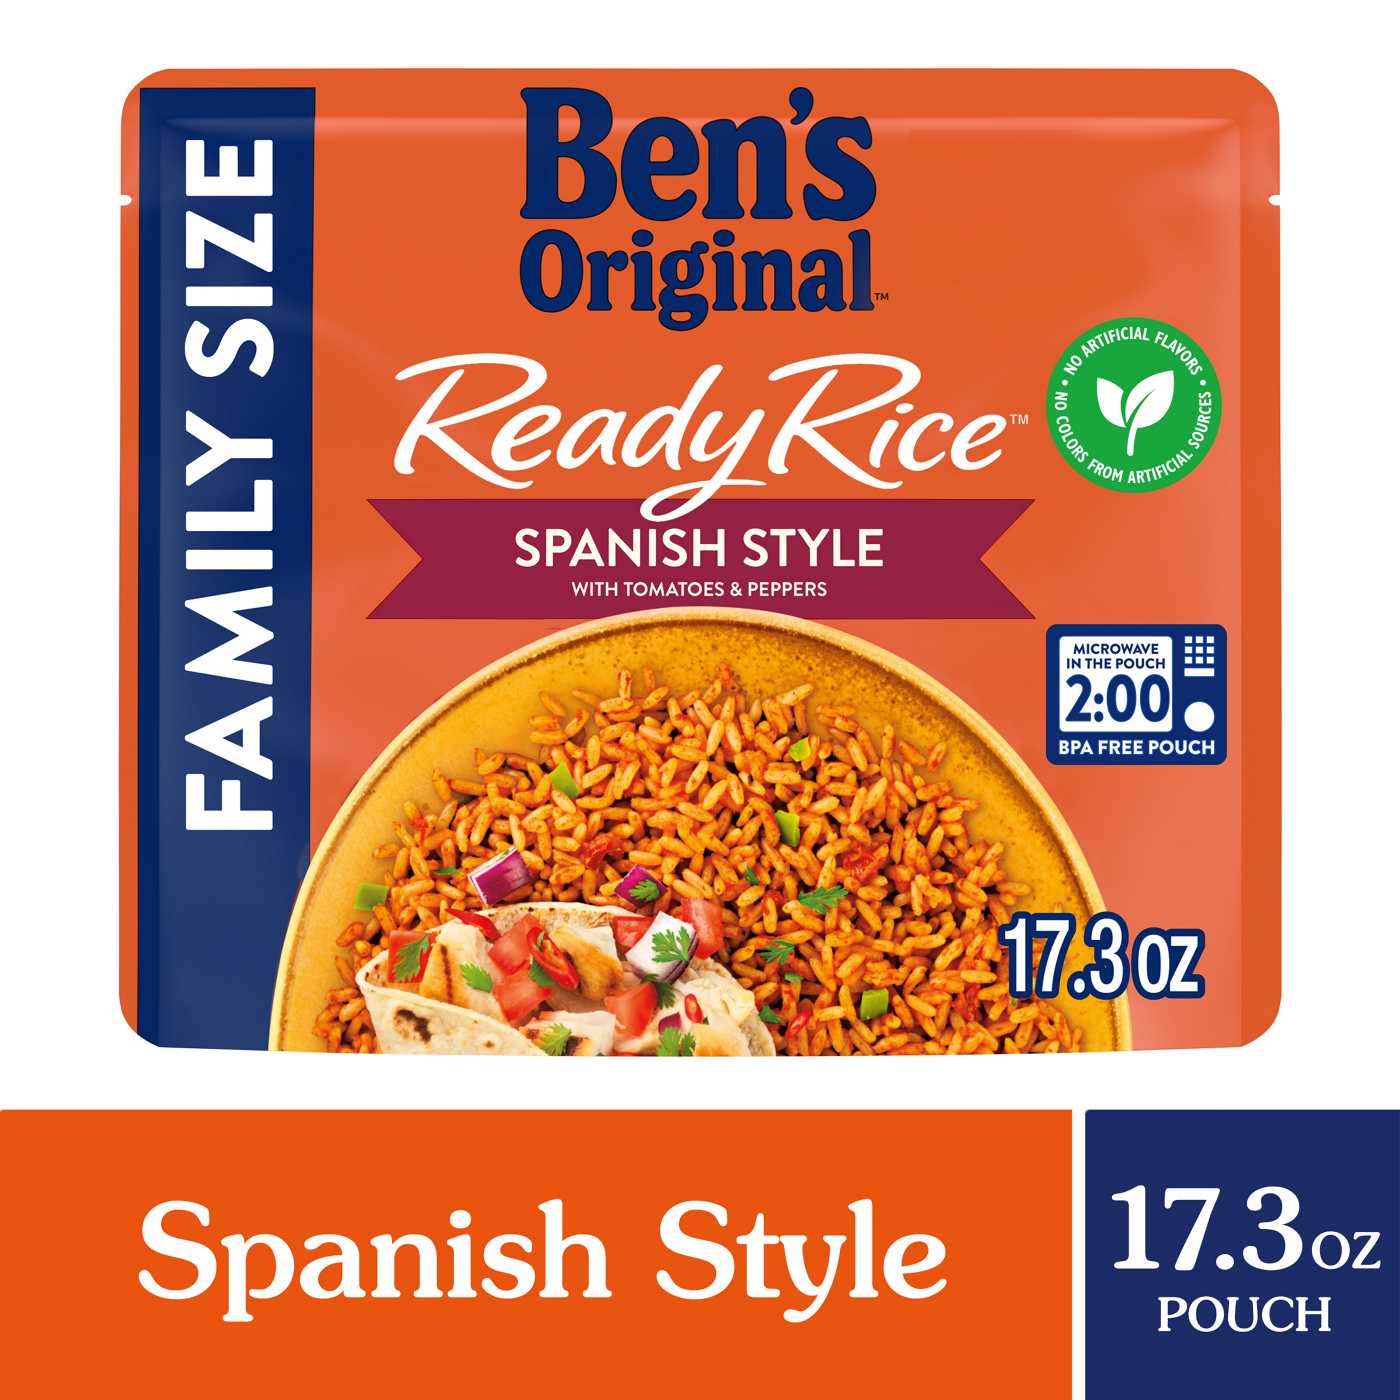 Ben's Original Ready Rice Spanish Style Flavored Family Size Rice; image 7 of 7